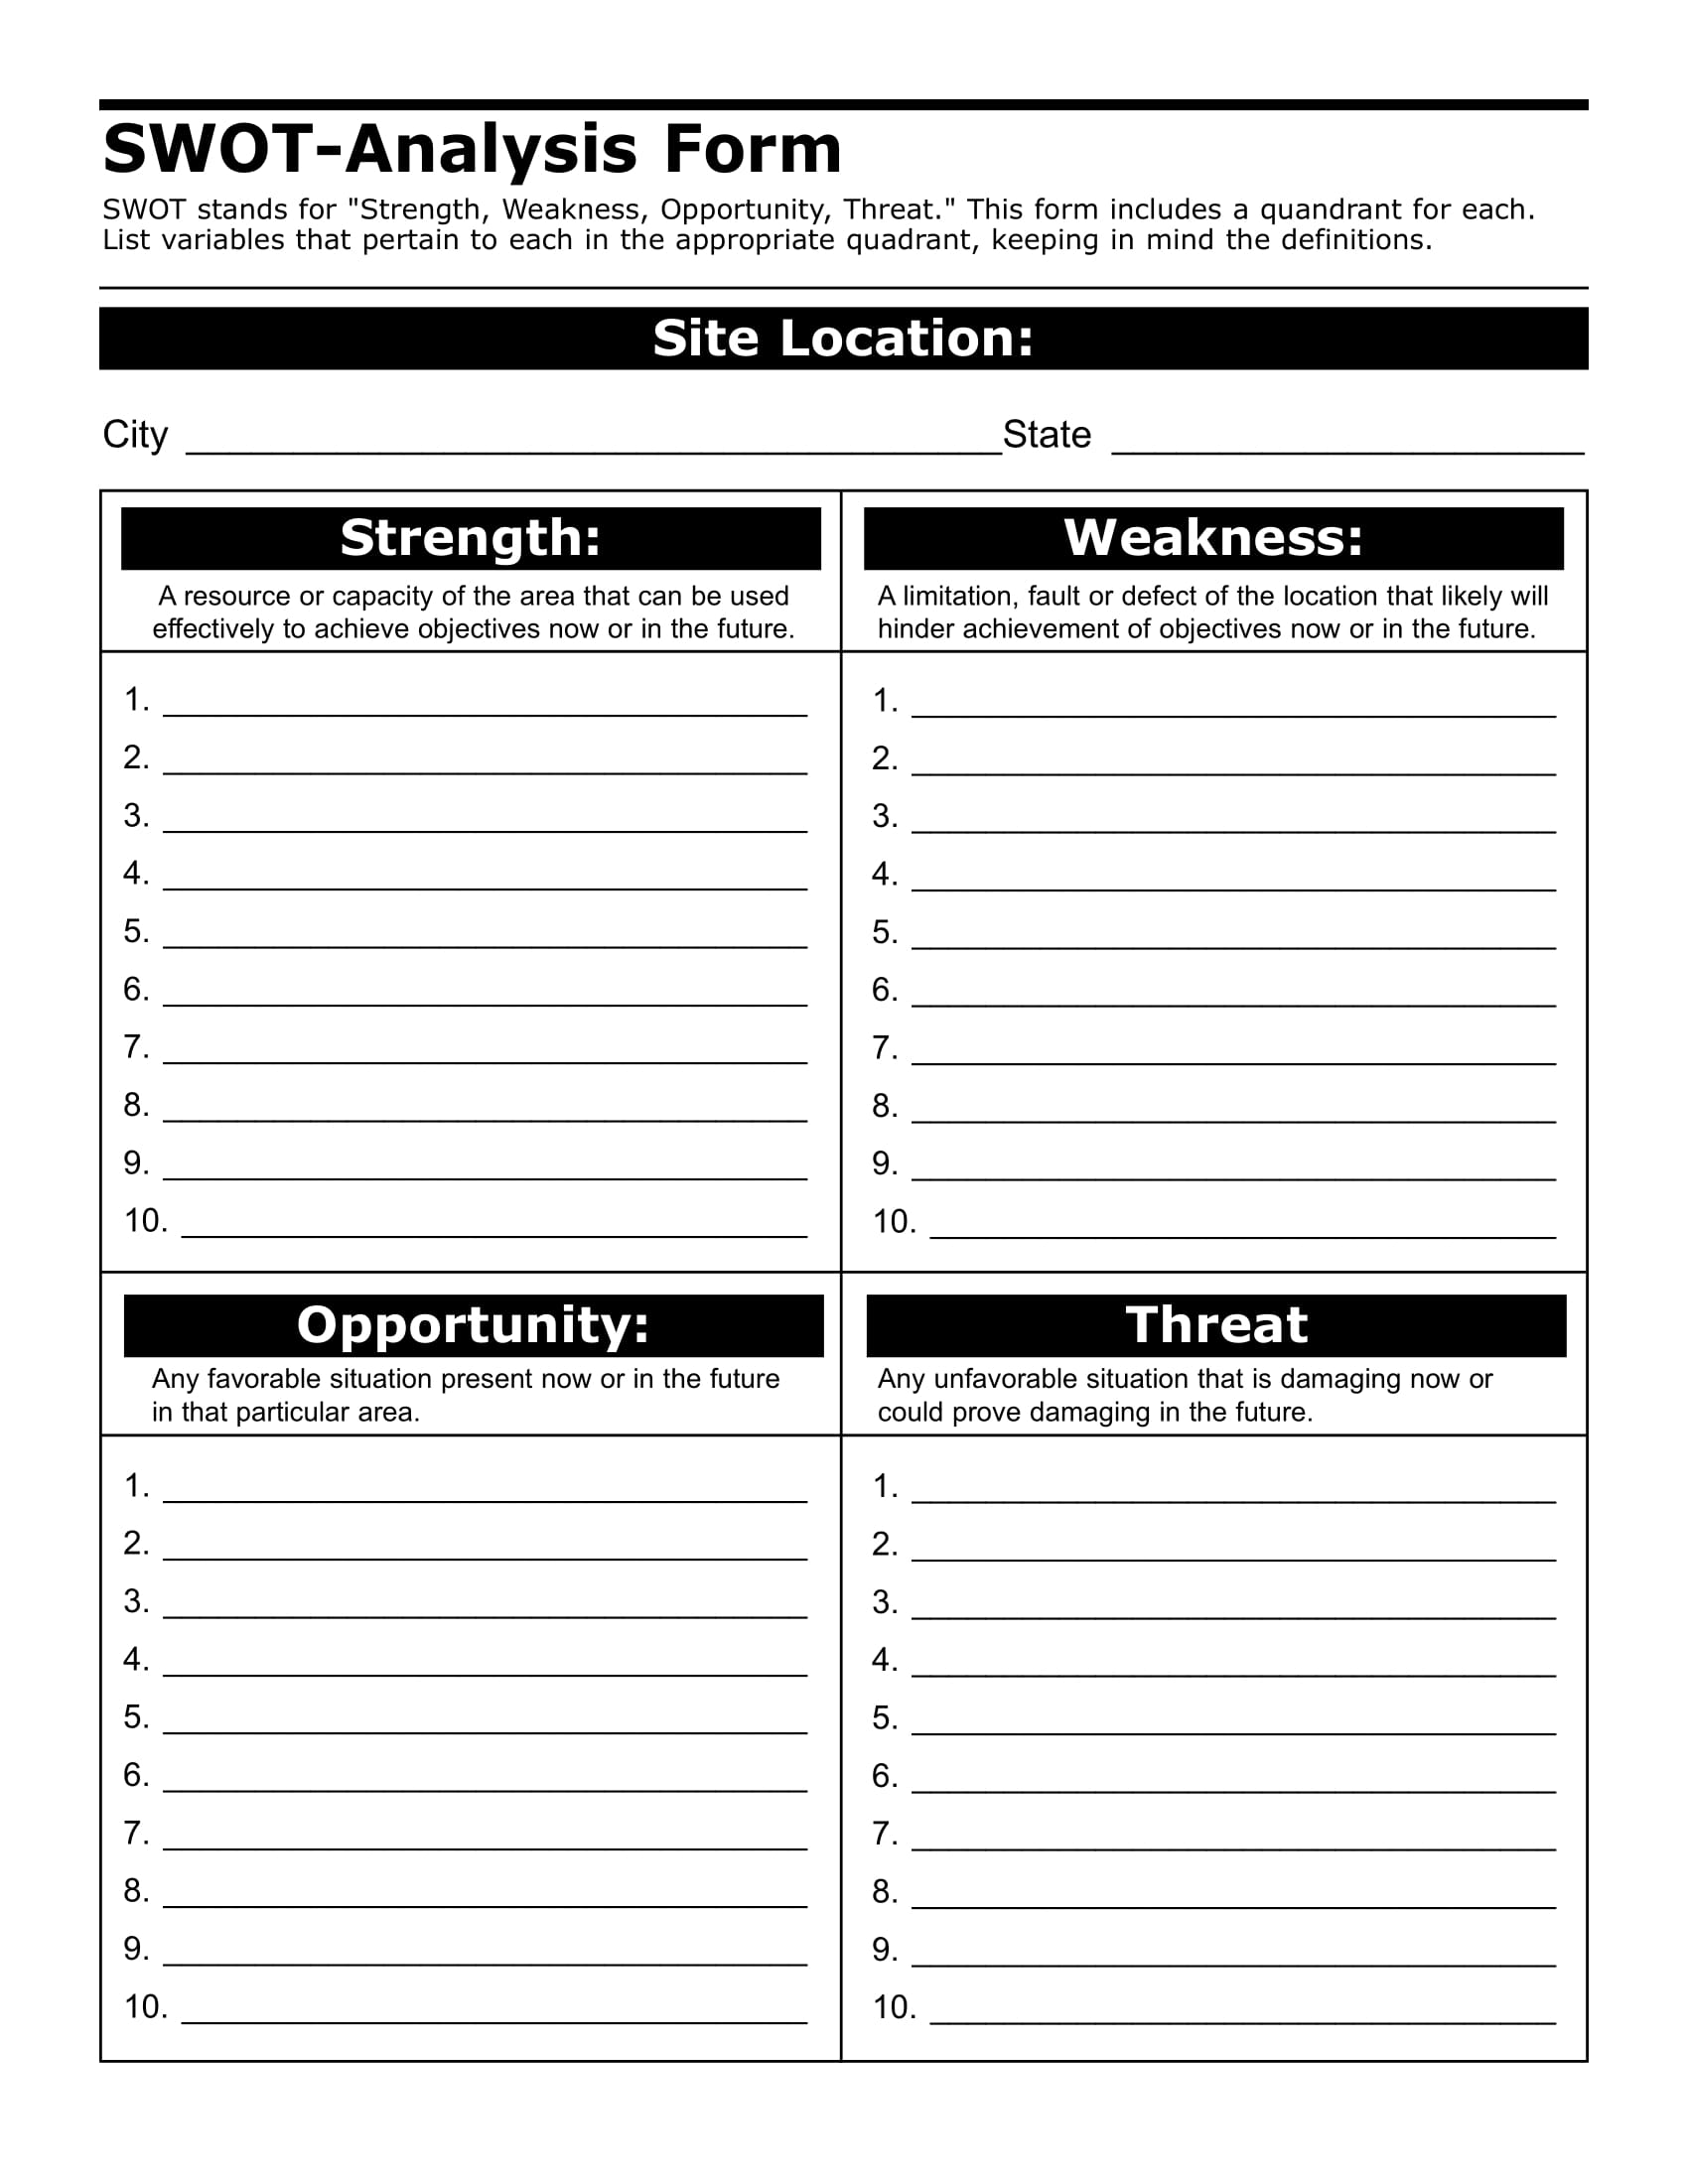 swot analysis chart form example 1